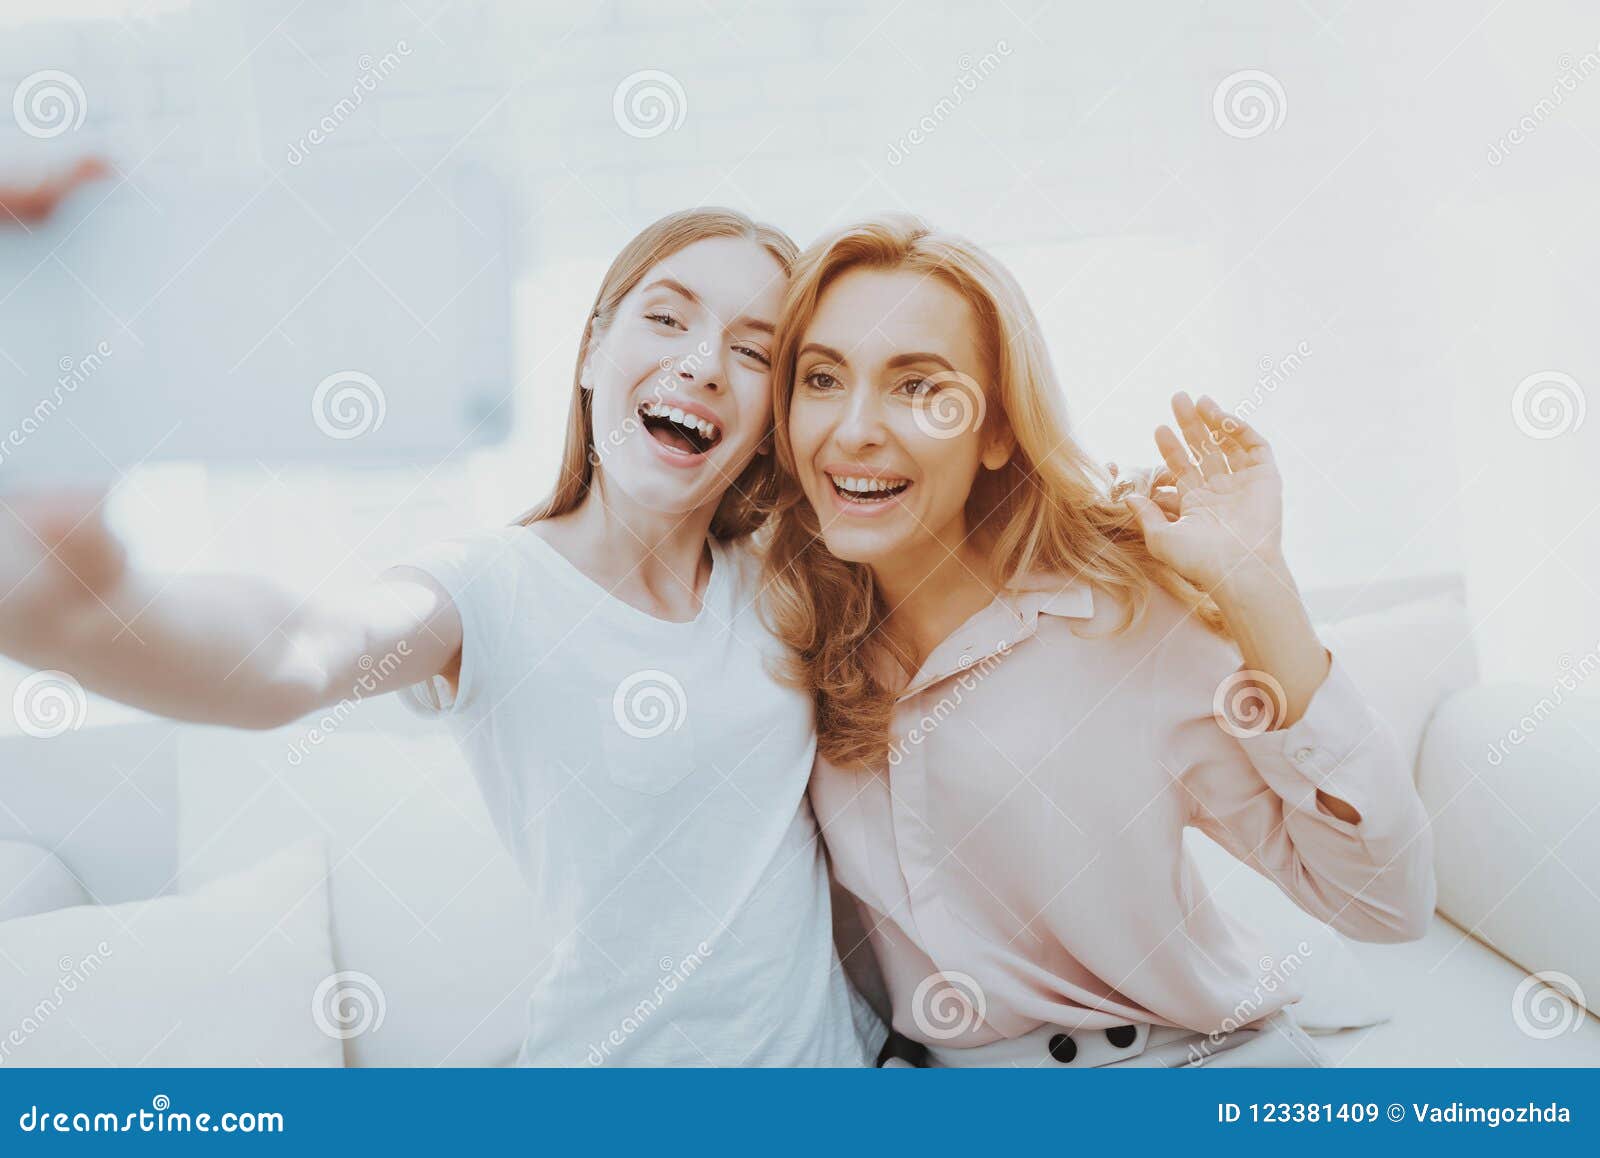 Mother and Teenage Daughter Taking Selfie on Sofa. Stock Image - Image ...